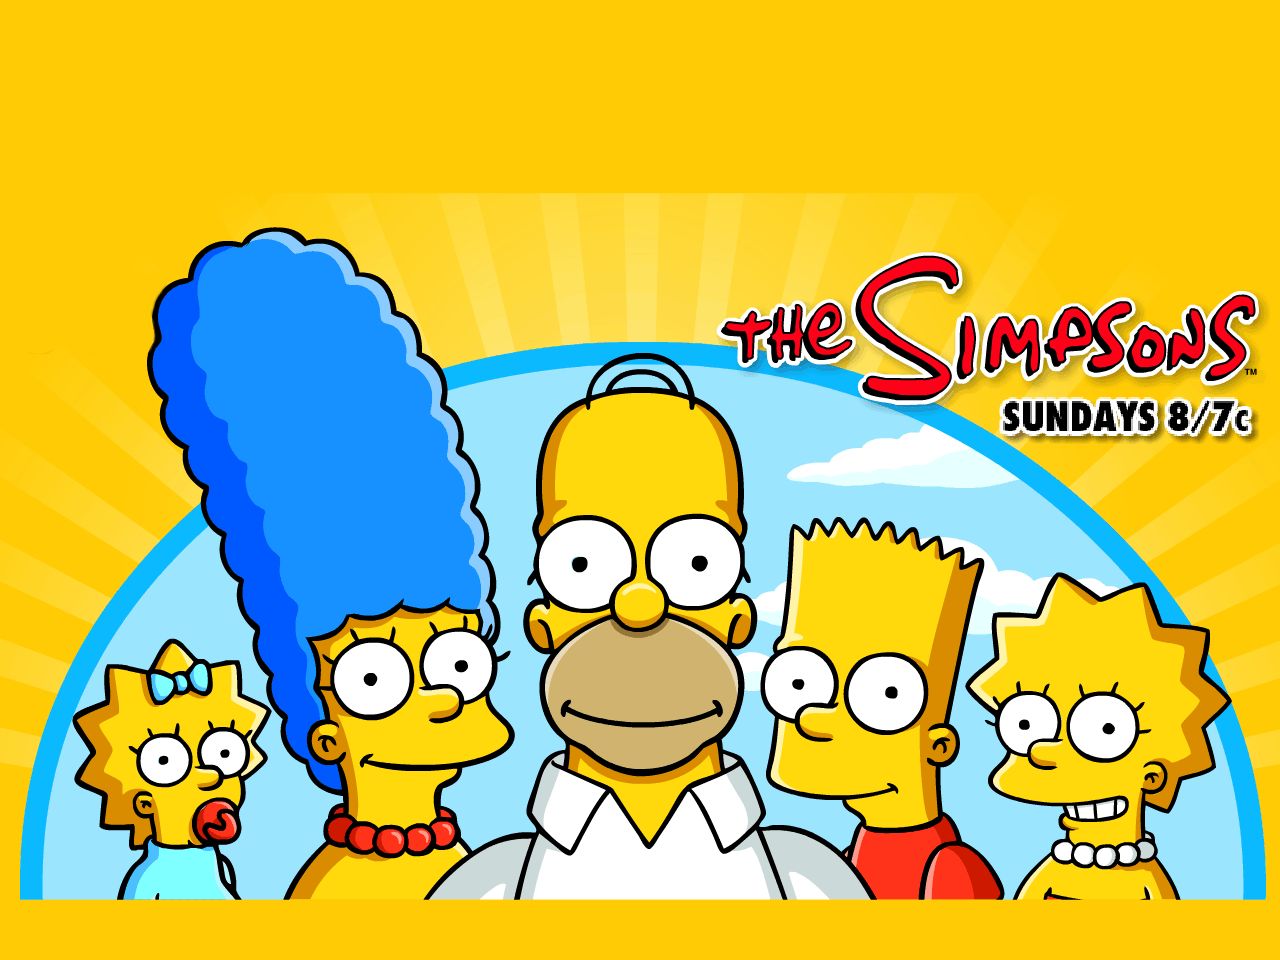 the simpsons, tv show, bart simpson, homer simpson, lisa simpson, maggie simpson, marge simpson